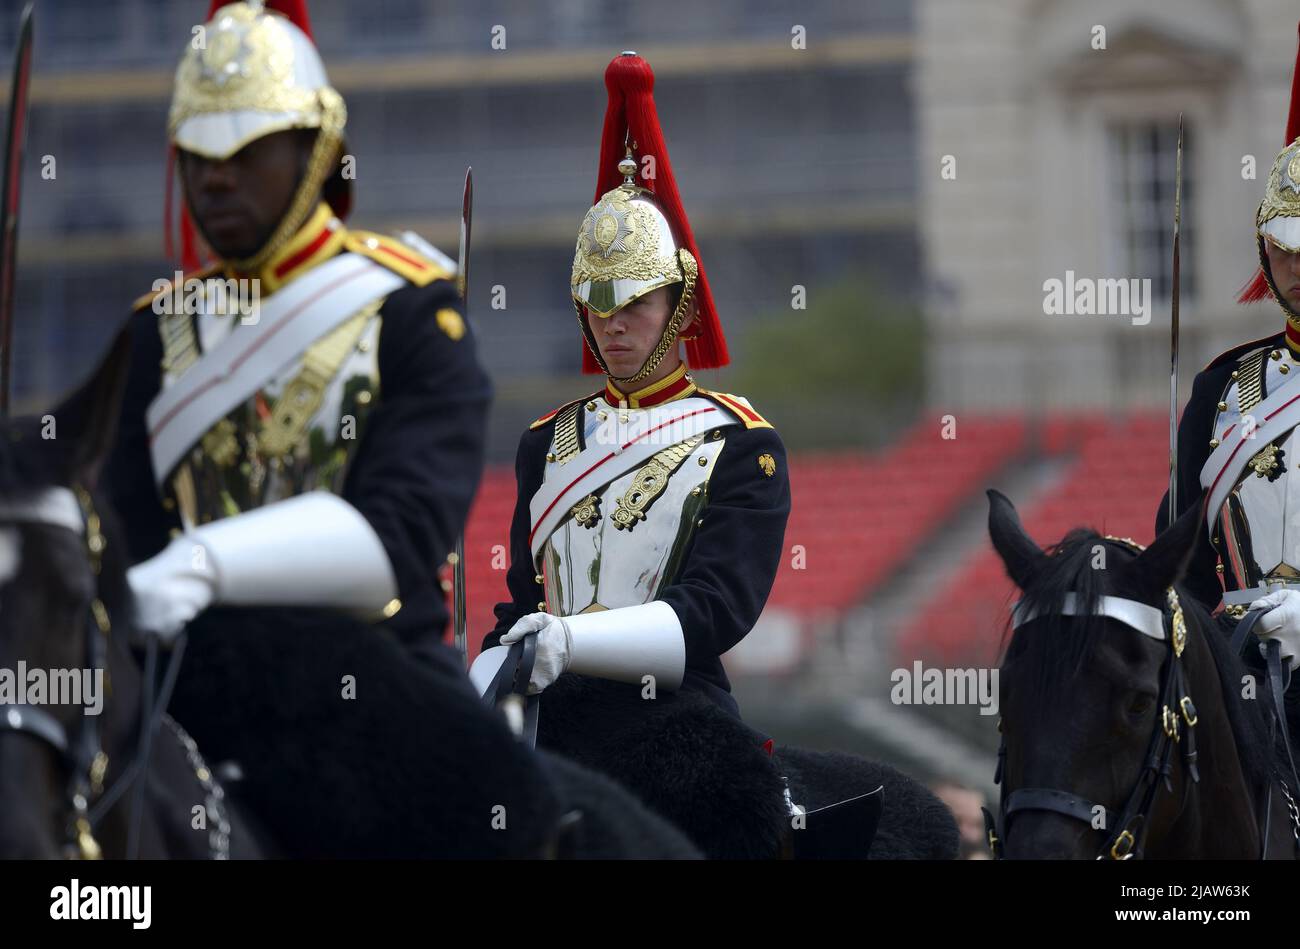 London, England, UK. Daily Changing of the Guard in Horse Guards Parade - members of the Blues and Royals Stock Photo